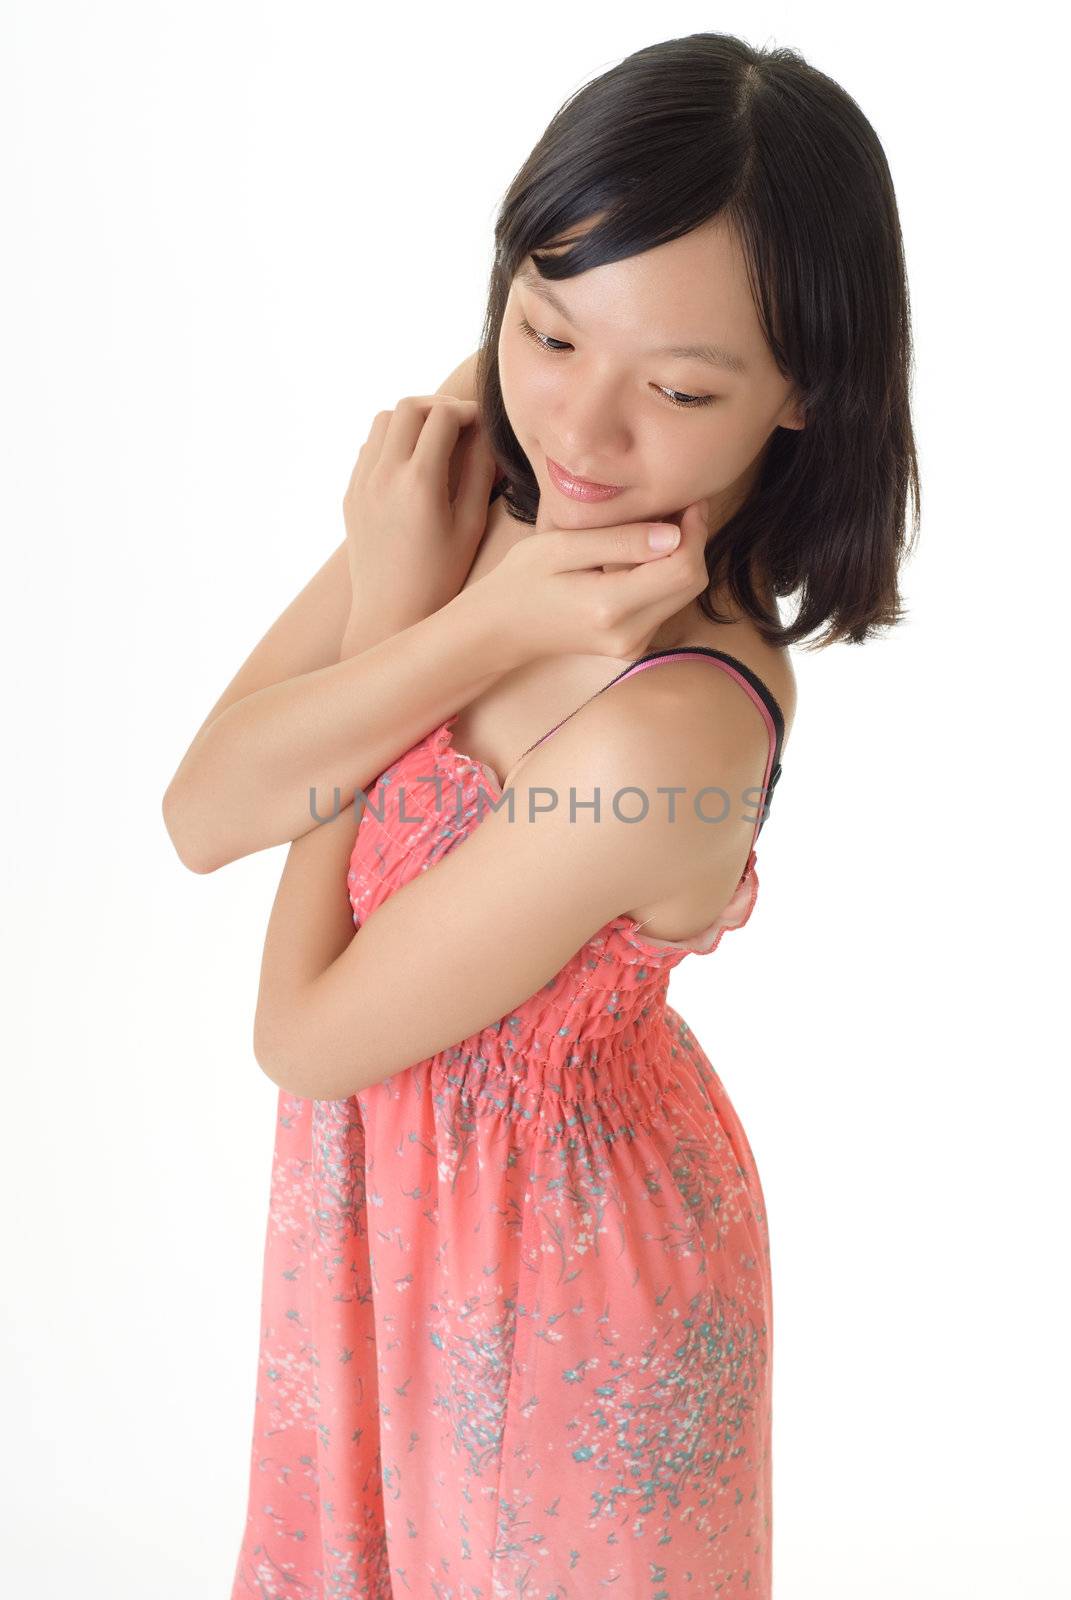 Oriental girl with pink dress standing against white background.